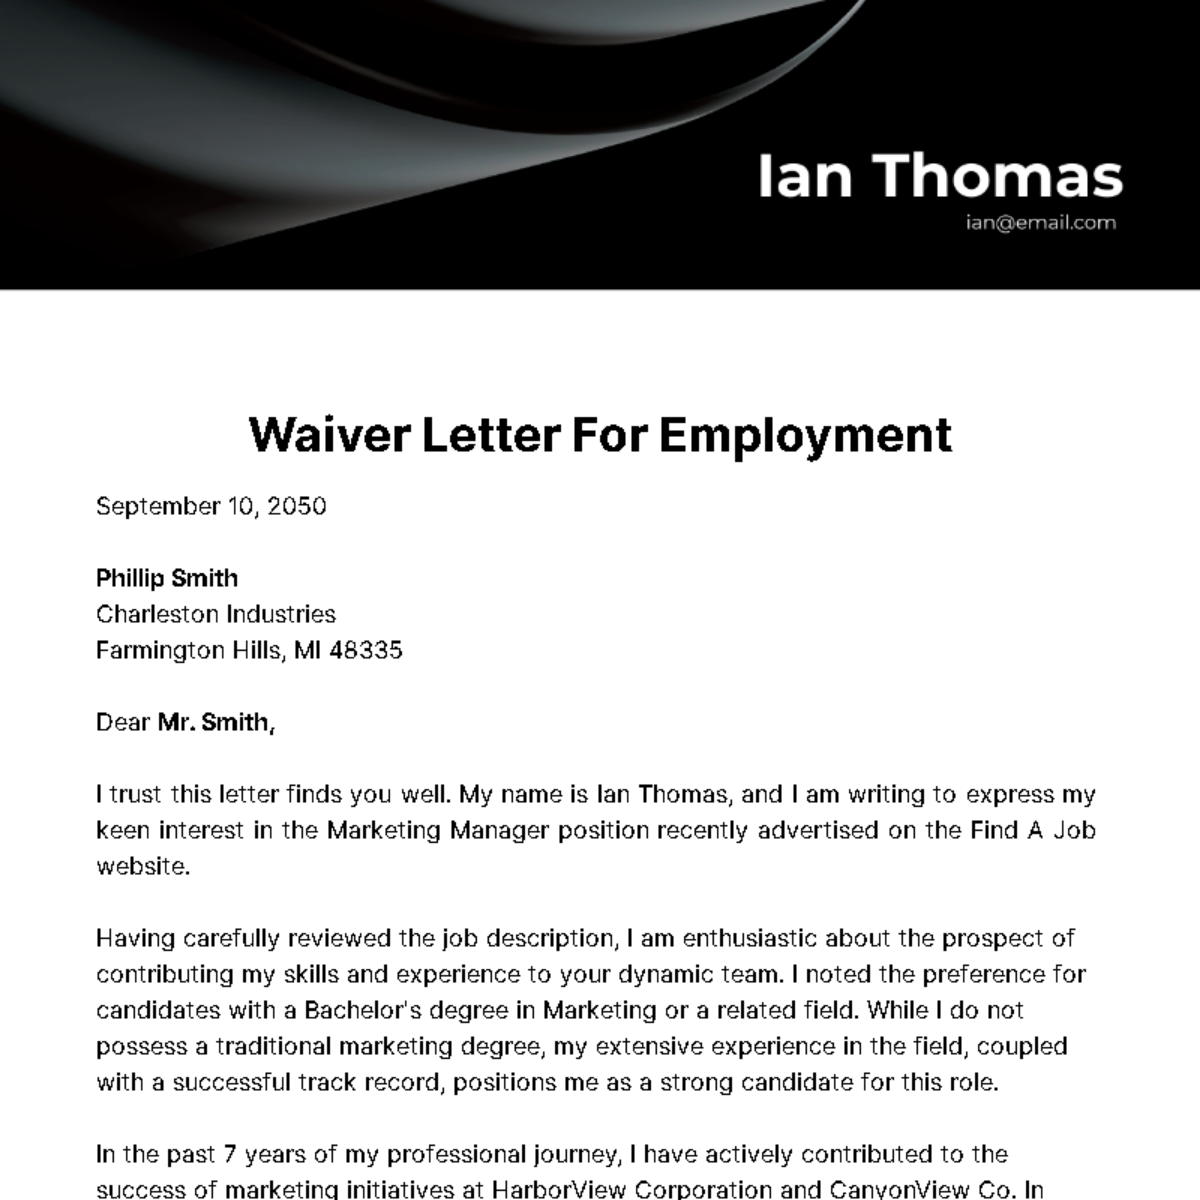 Waiver Letter for Employment Template